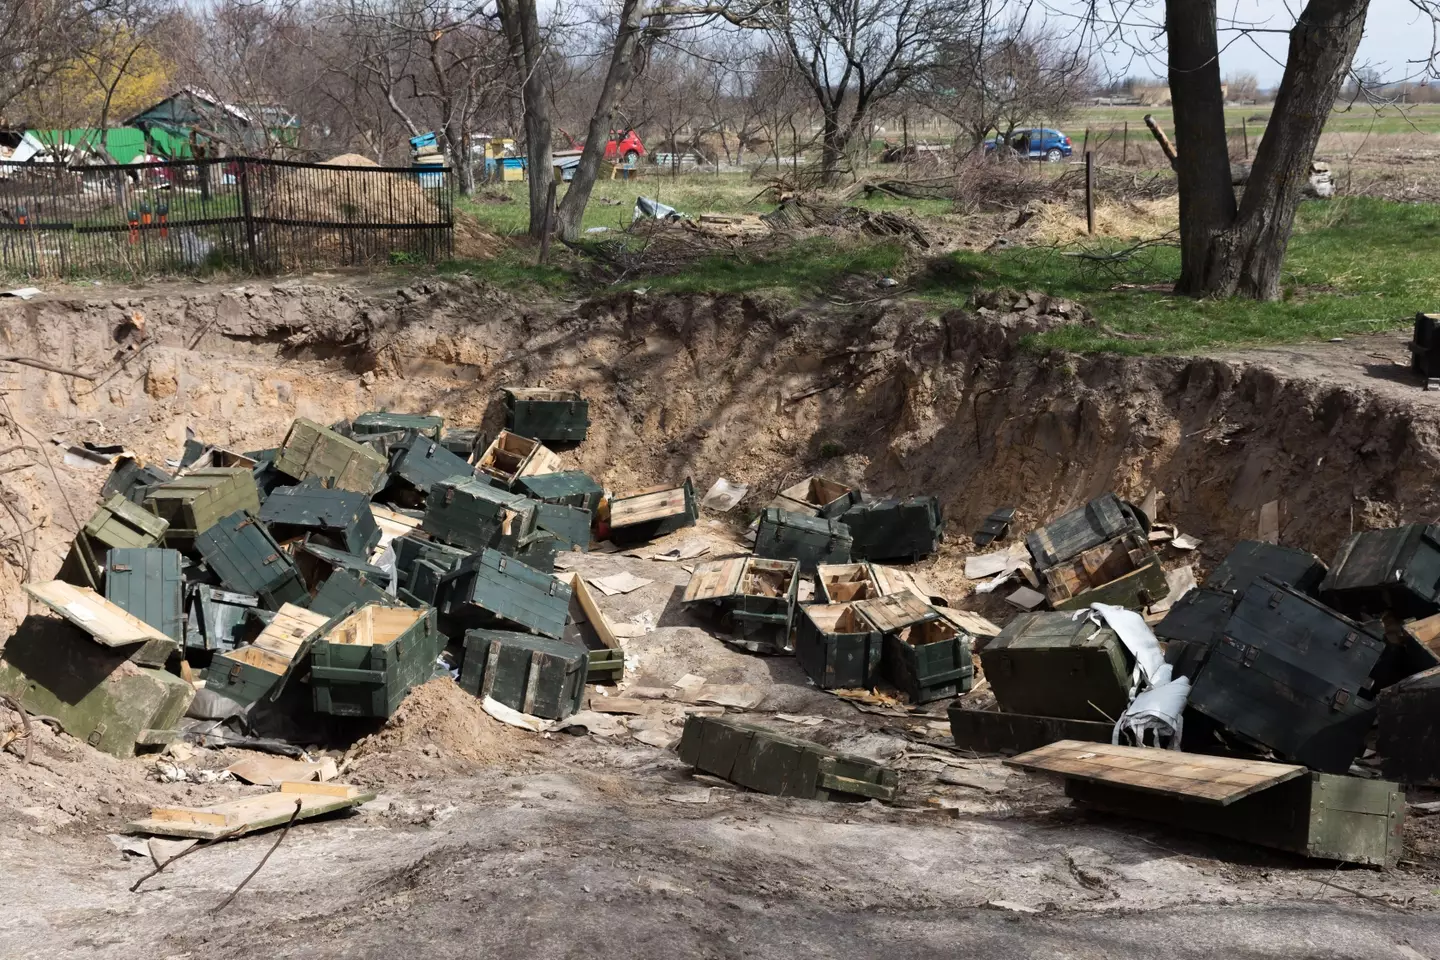 Military kit discarded by retreating Russian forces.